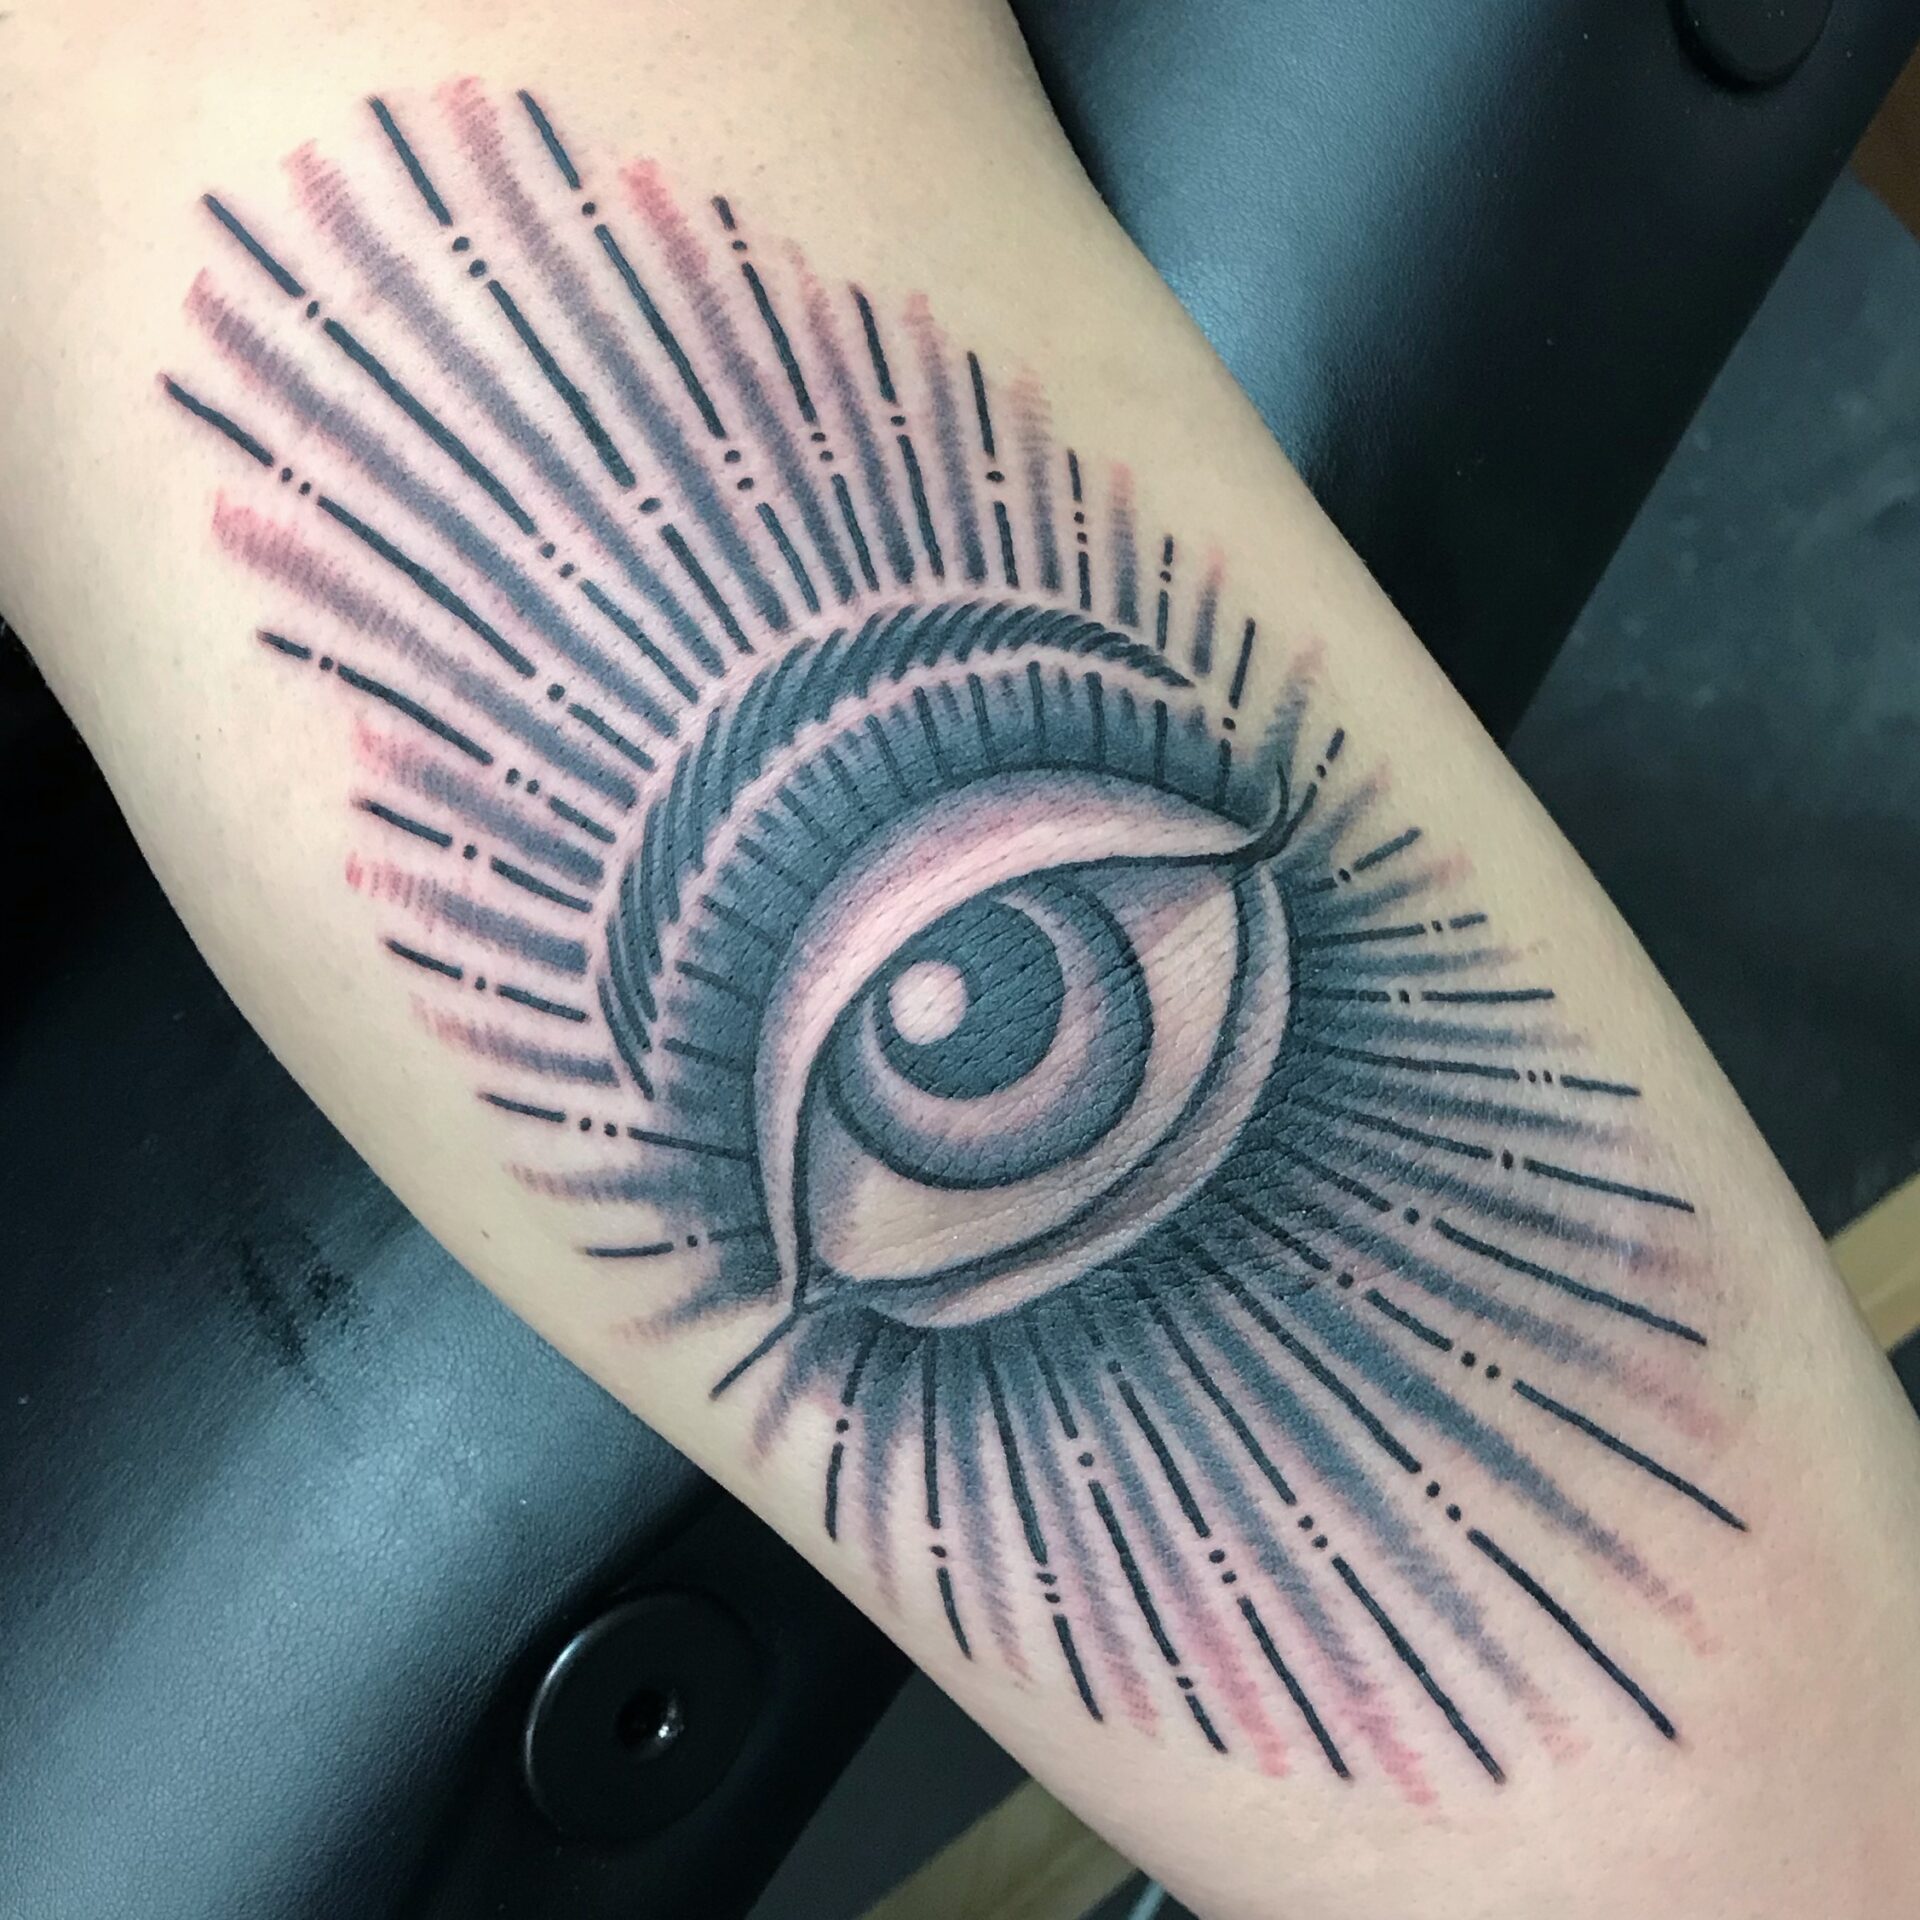 A tattoo of an eye with rays coming out it.